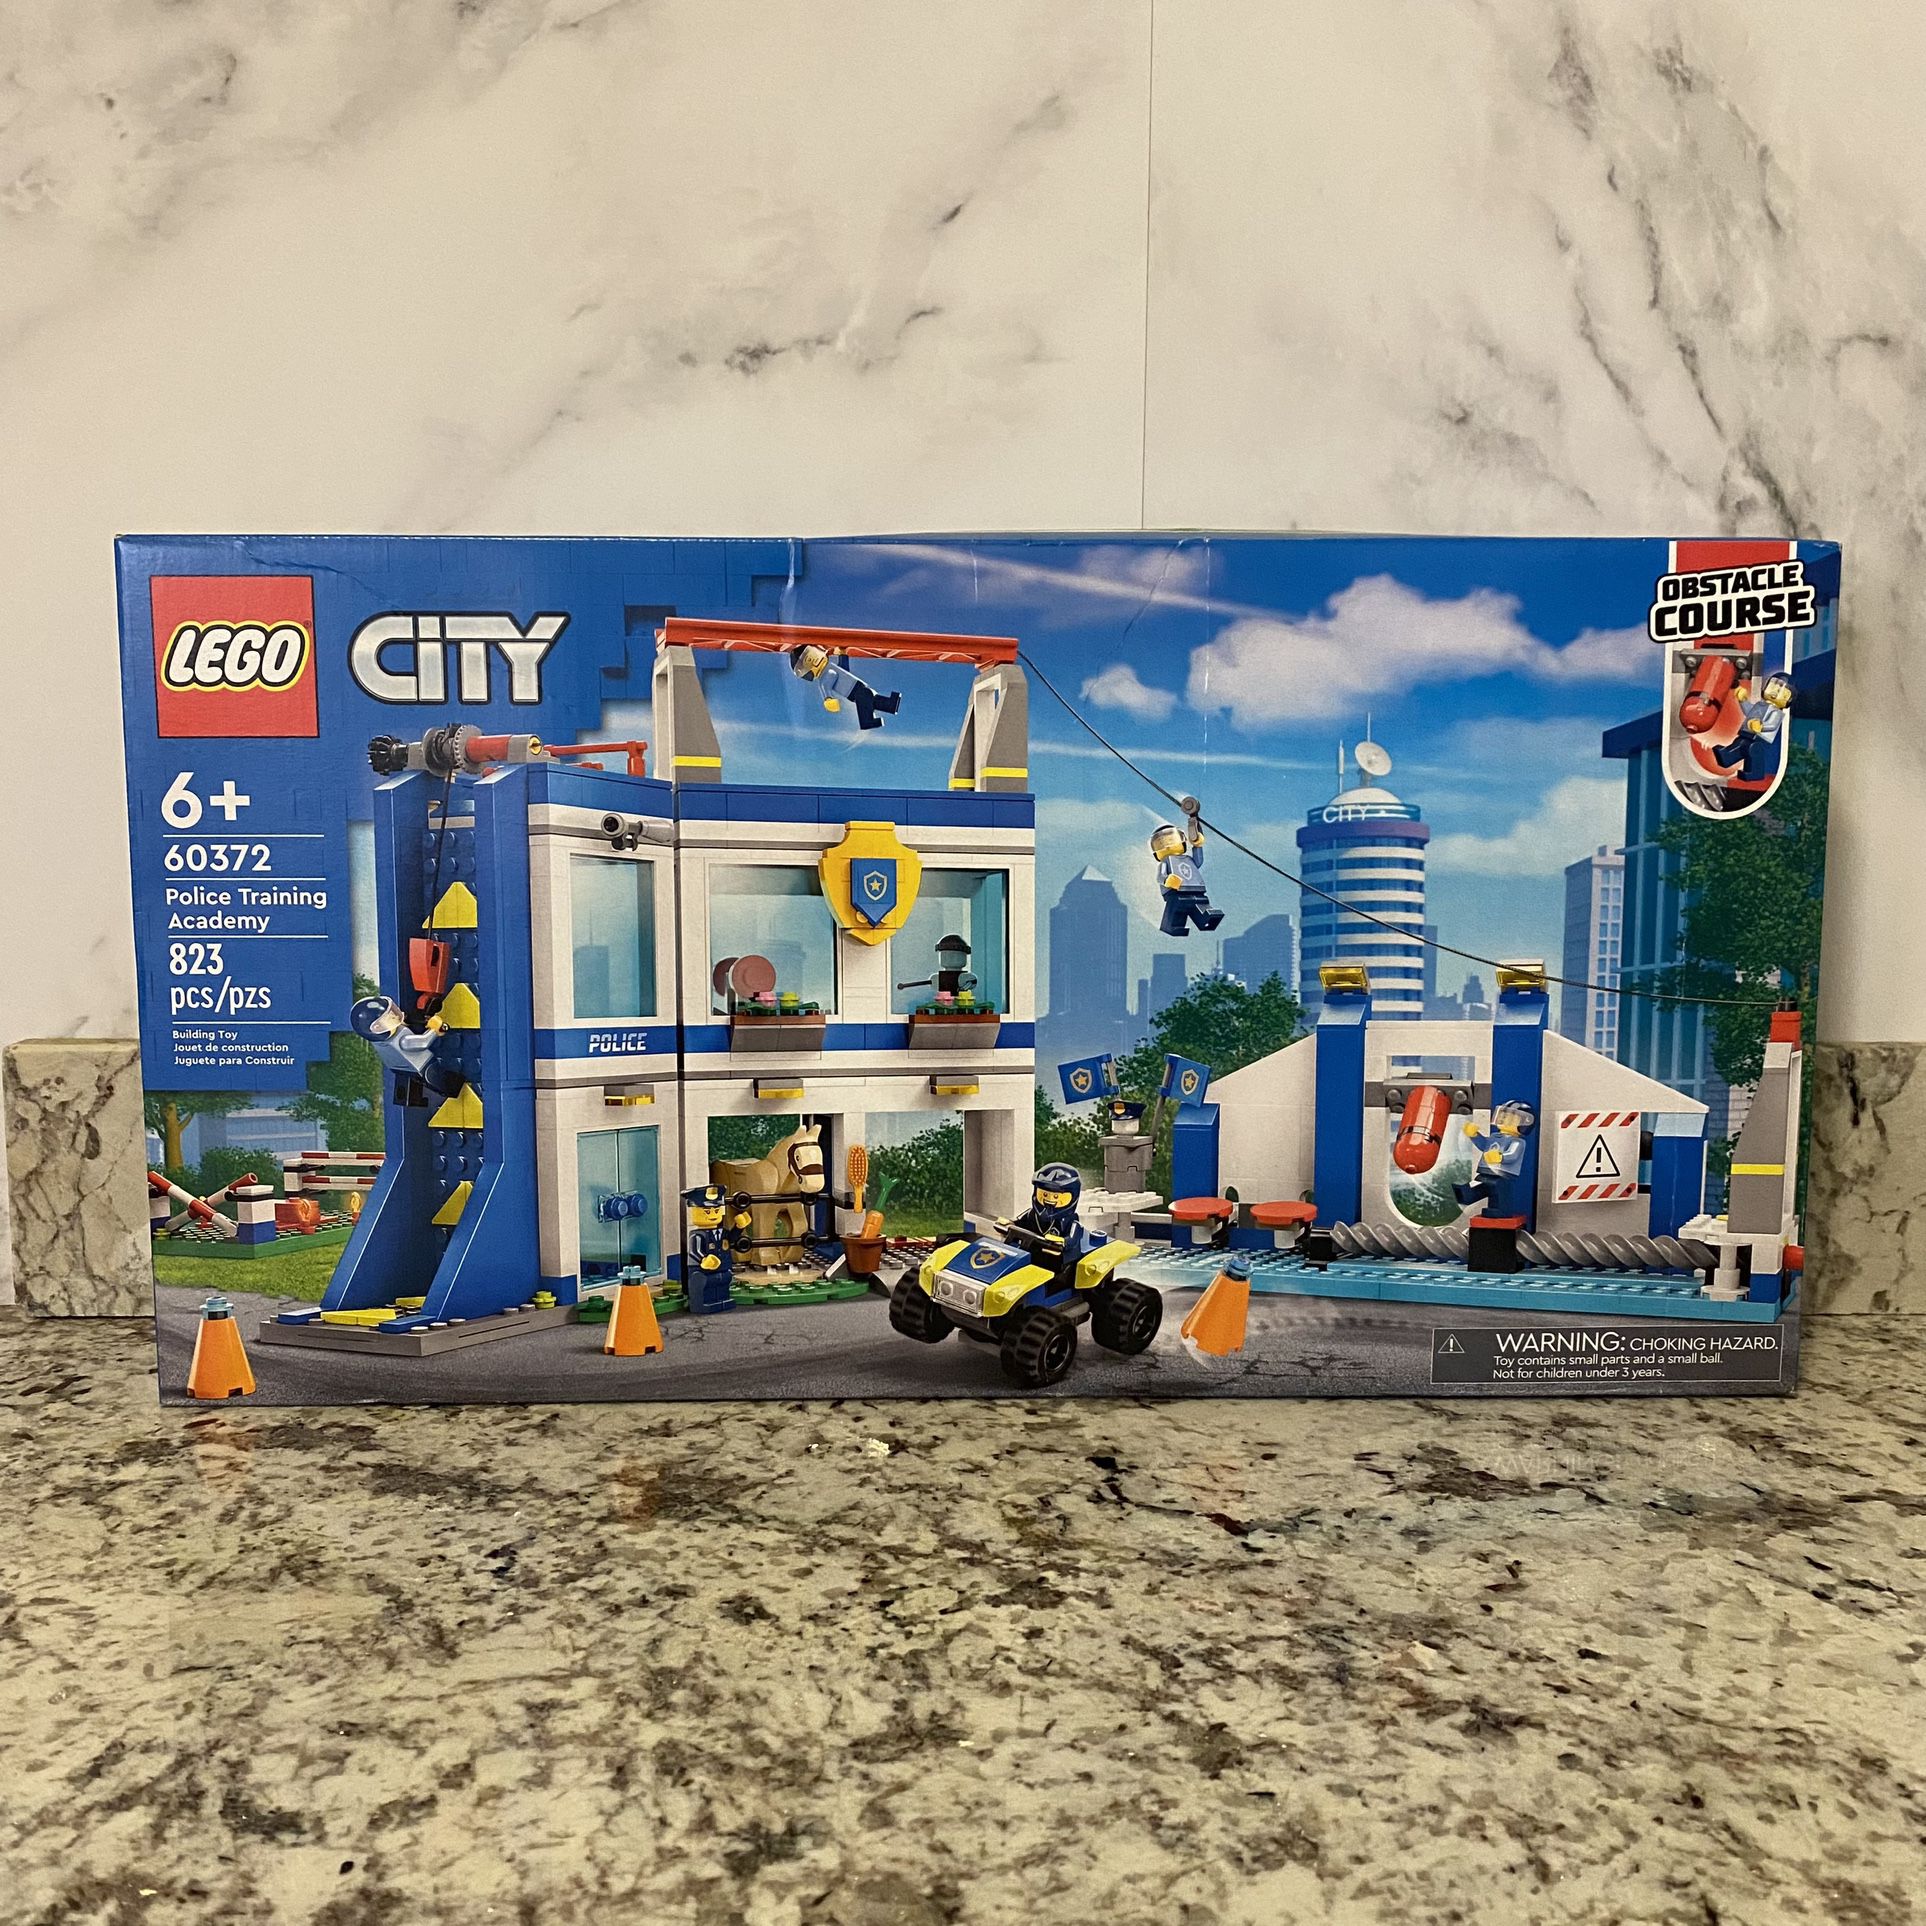 LEGO City Police Training Academy Obstacle Course Set 60372